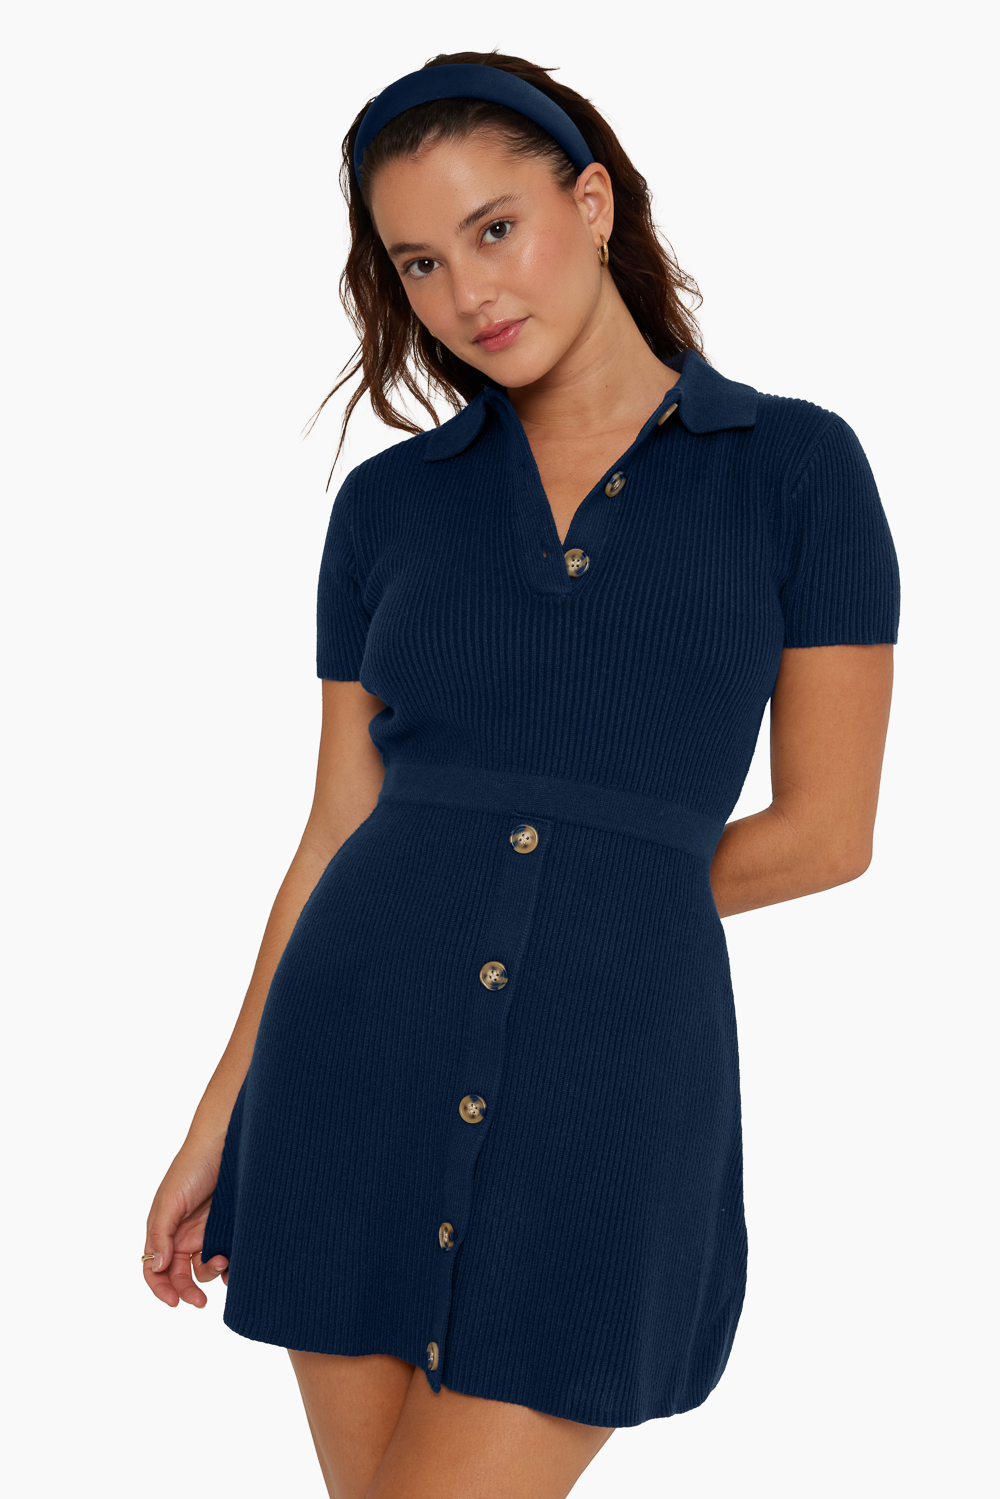 SET™ POLO KNIT DRESS IN EMPIRE